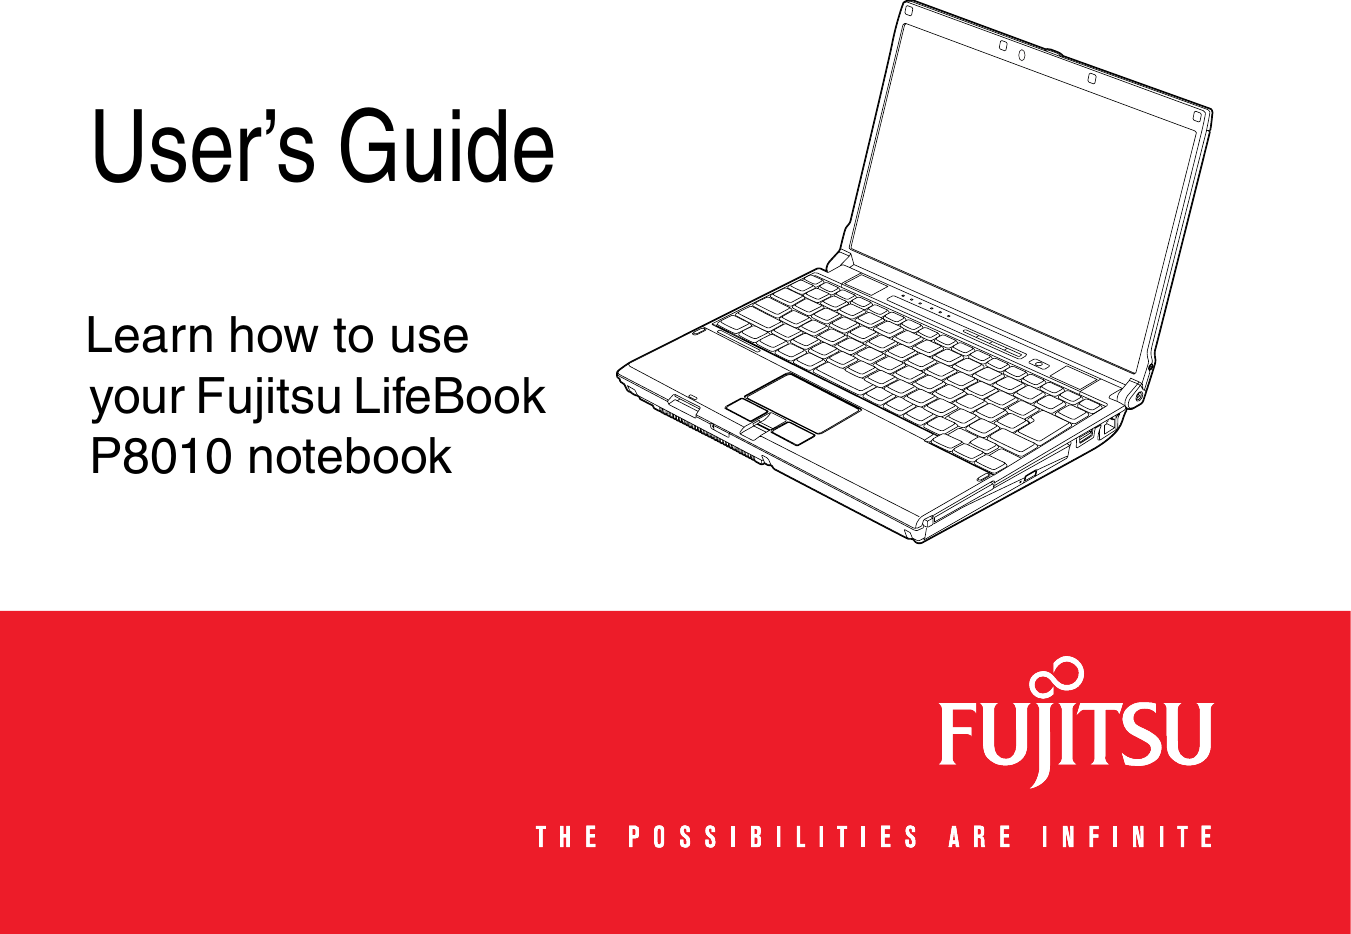   User’s GuideLearn how to use your Fujitsu LifeBook P8010 notebook